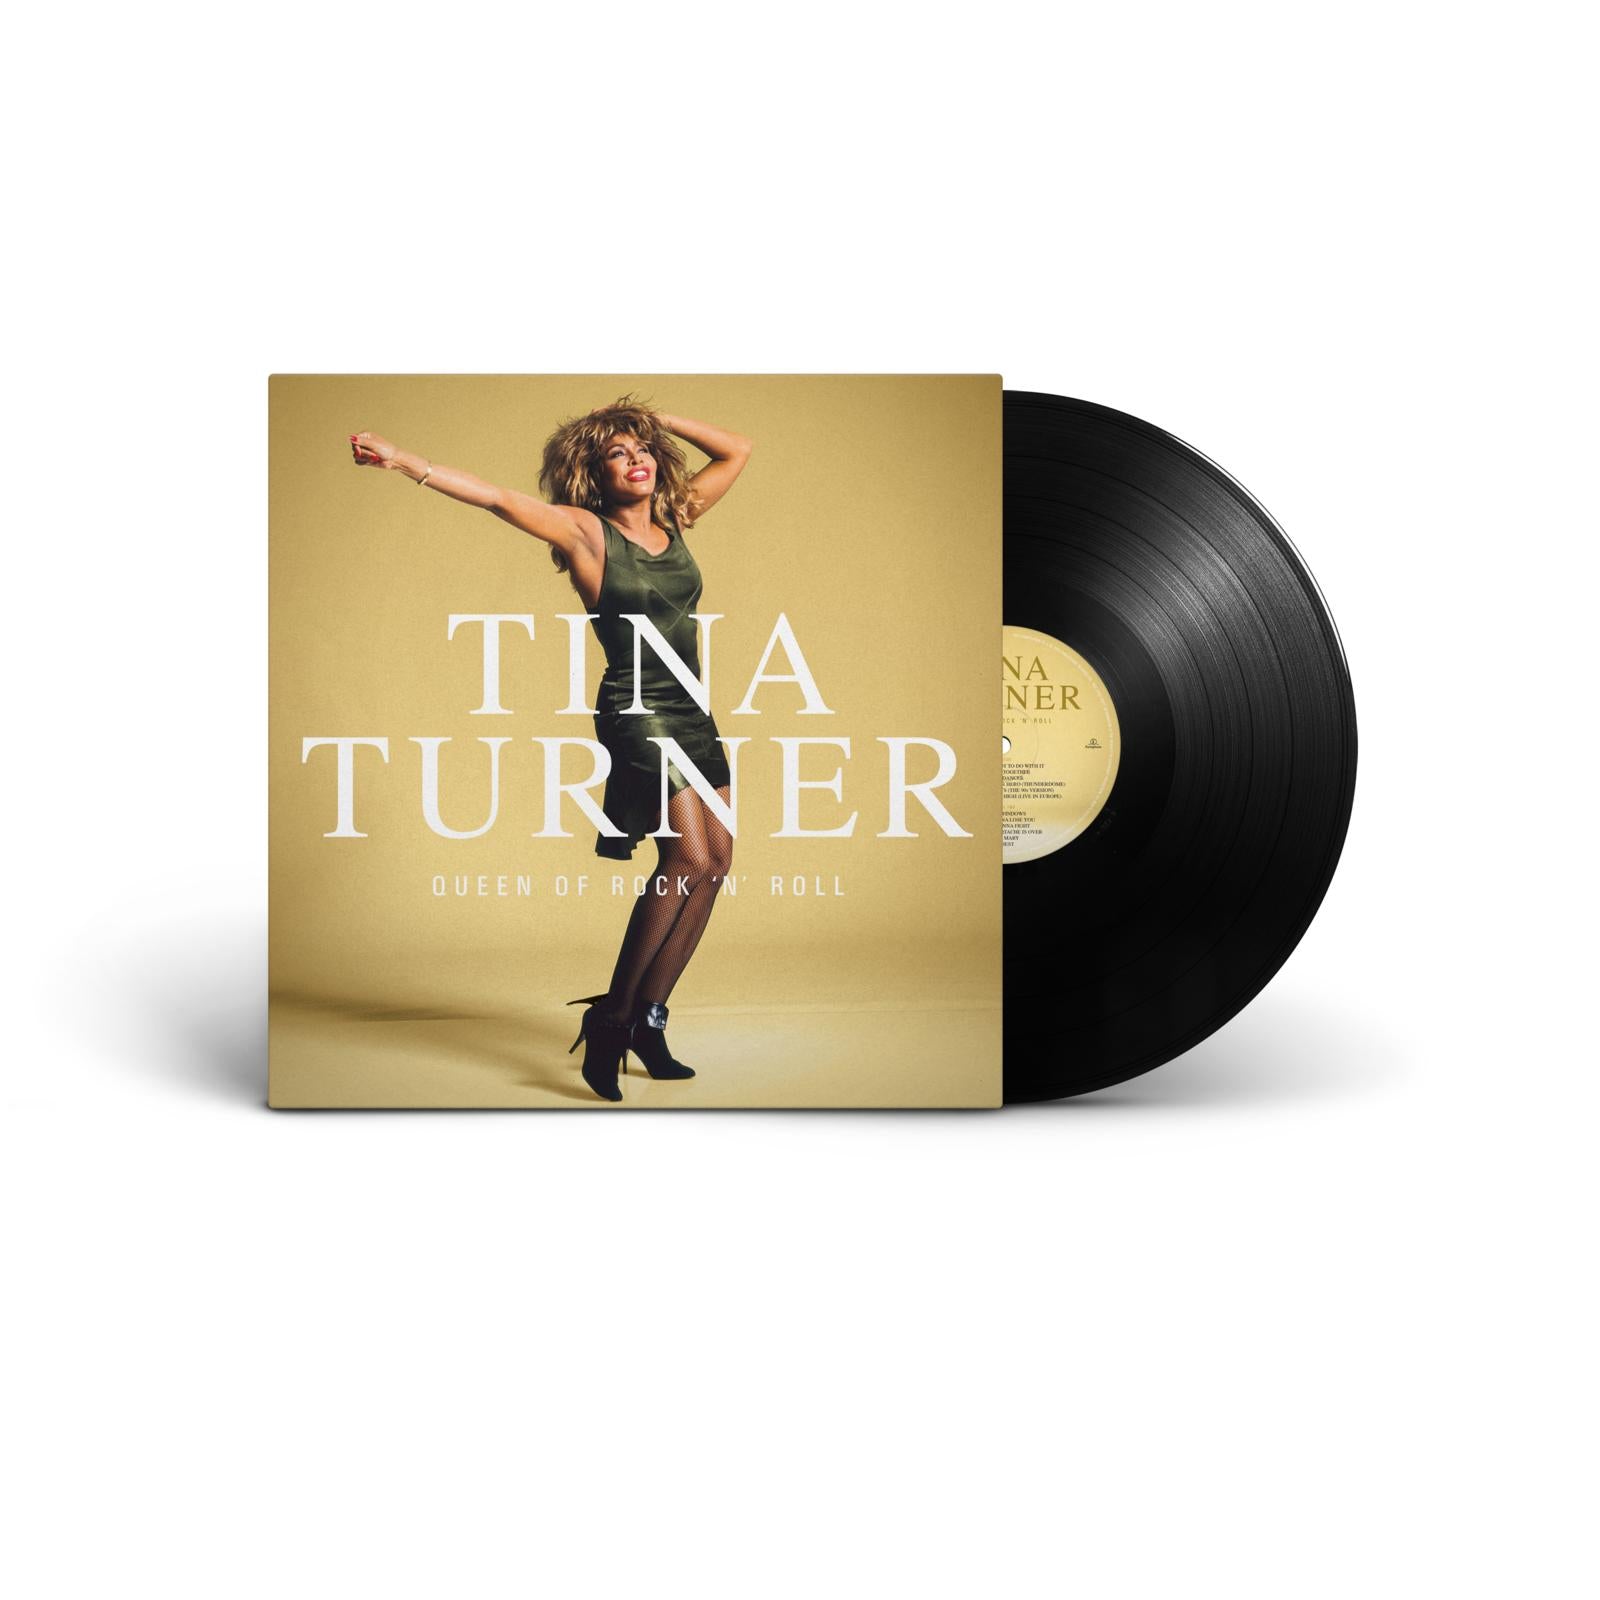 Tina Turner The Queen of Rock and Roll - Ireland Vinyl